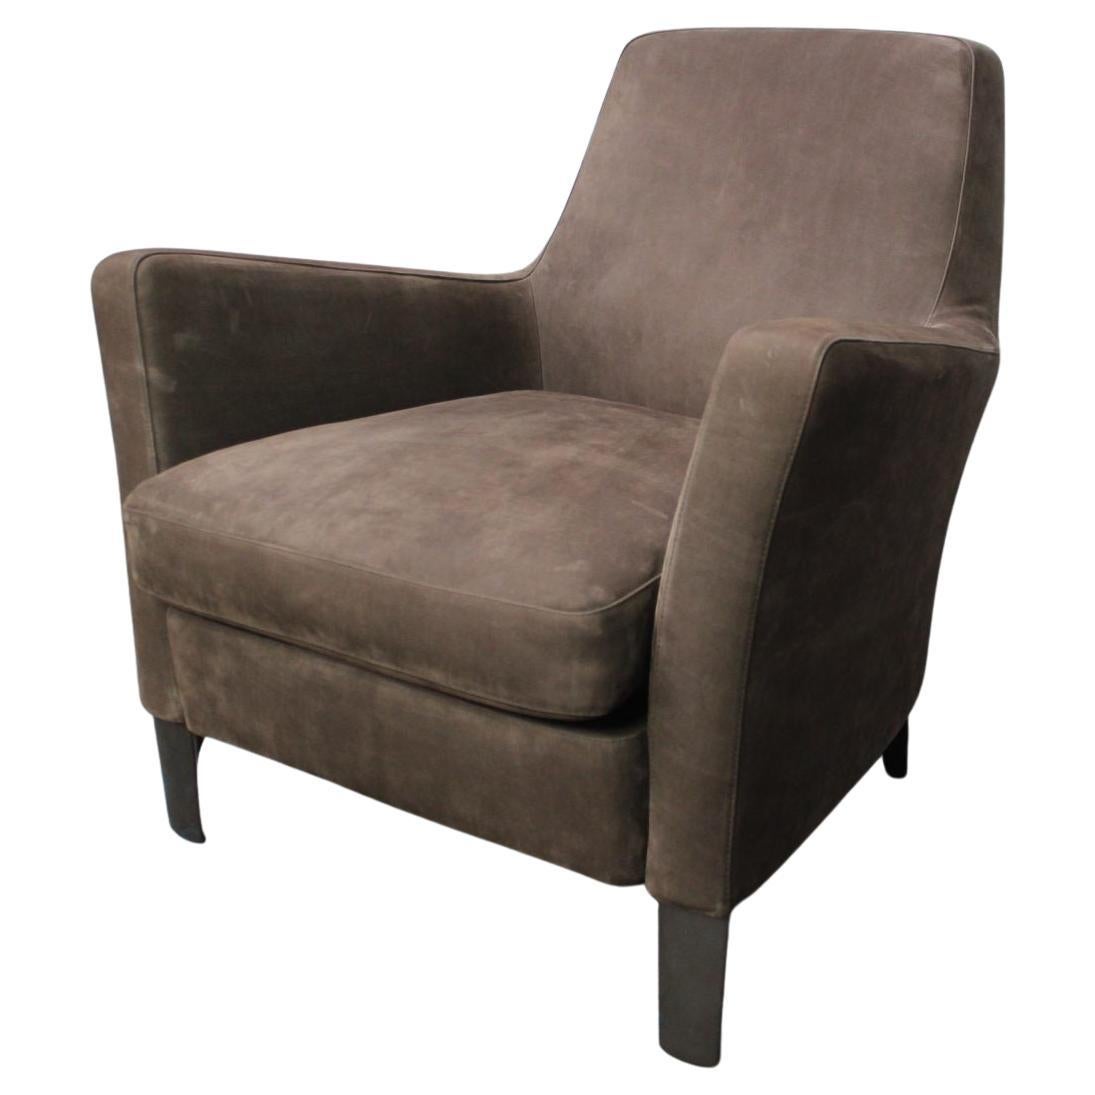 Peerless Pristine Minotti “Denny” Armchair in Suede Leather For Sale